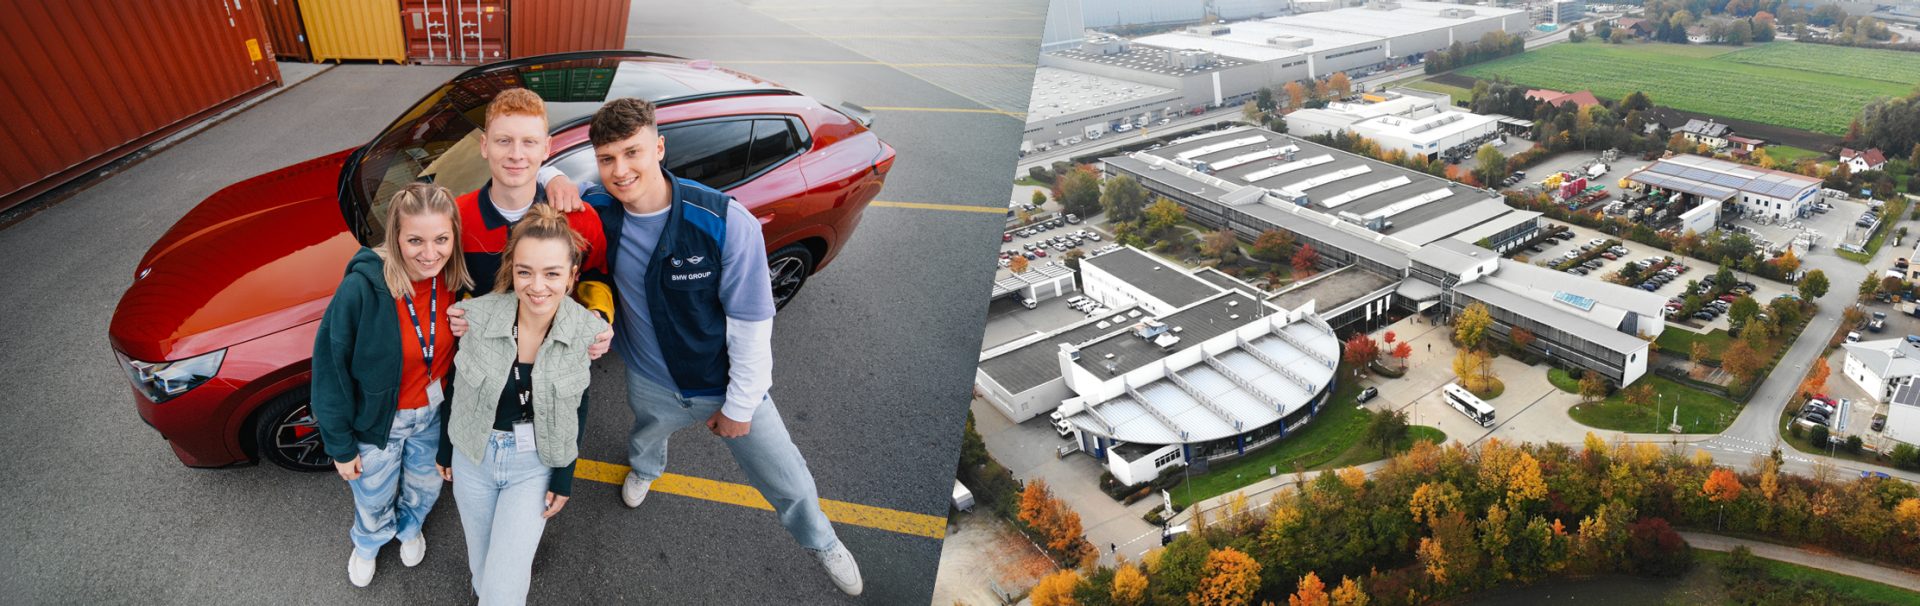 Apprentices with a BMW X2 and aerial view of the BMW Dingolfing plant